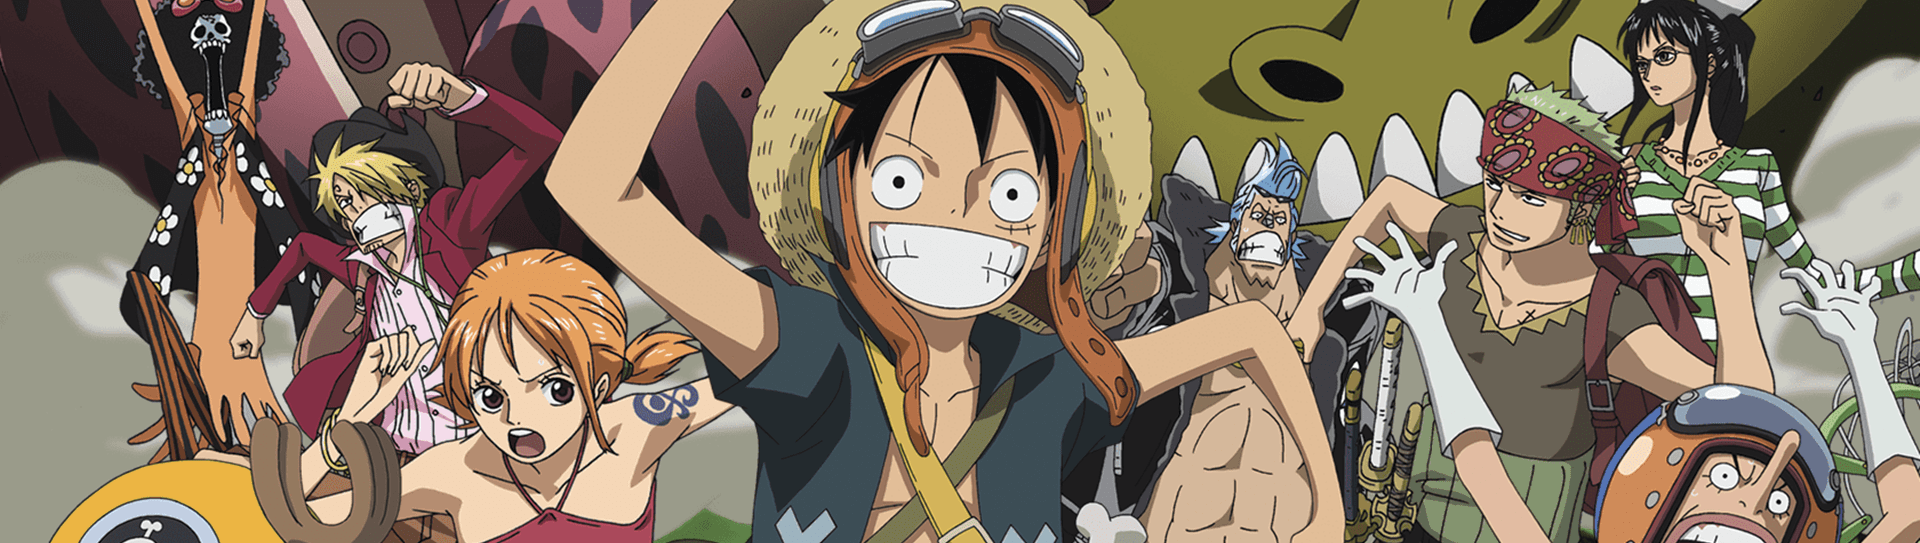 one piece strong world full movie online